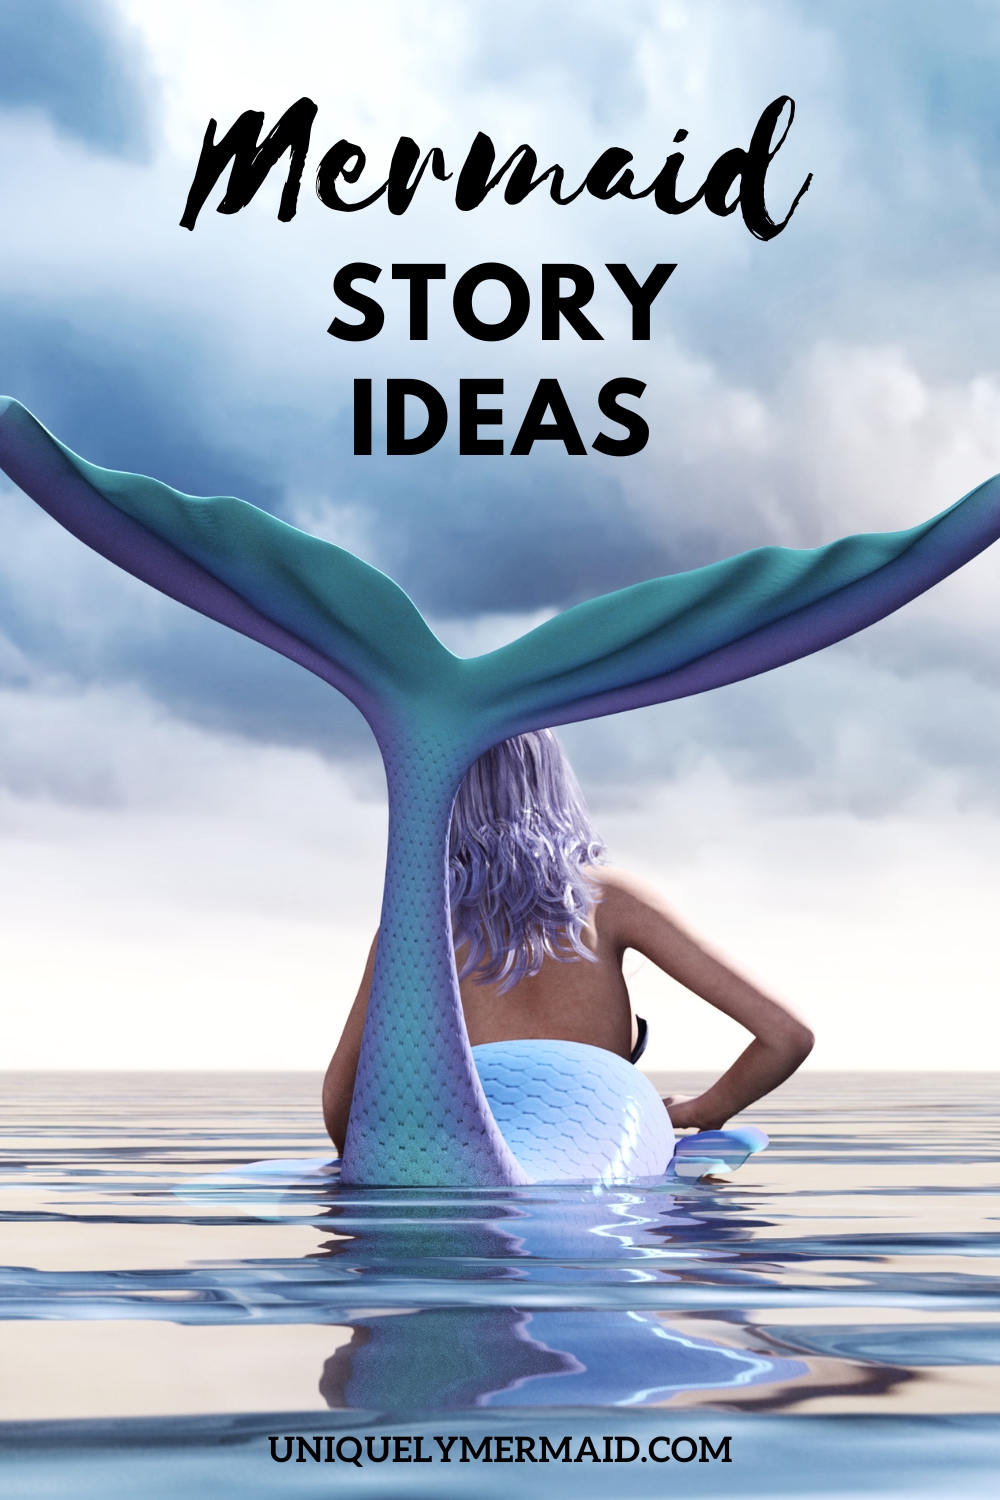 You'll love these mermaid story ideas from a variety of different genres. Find the best writing prompt and start telling your story!